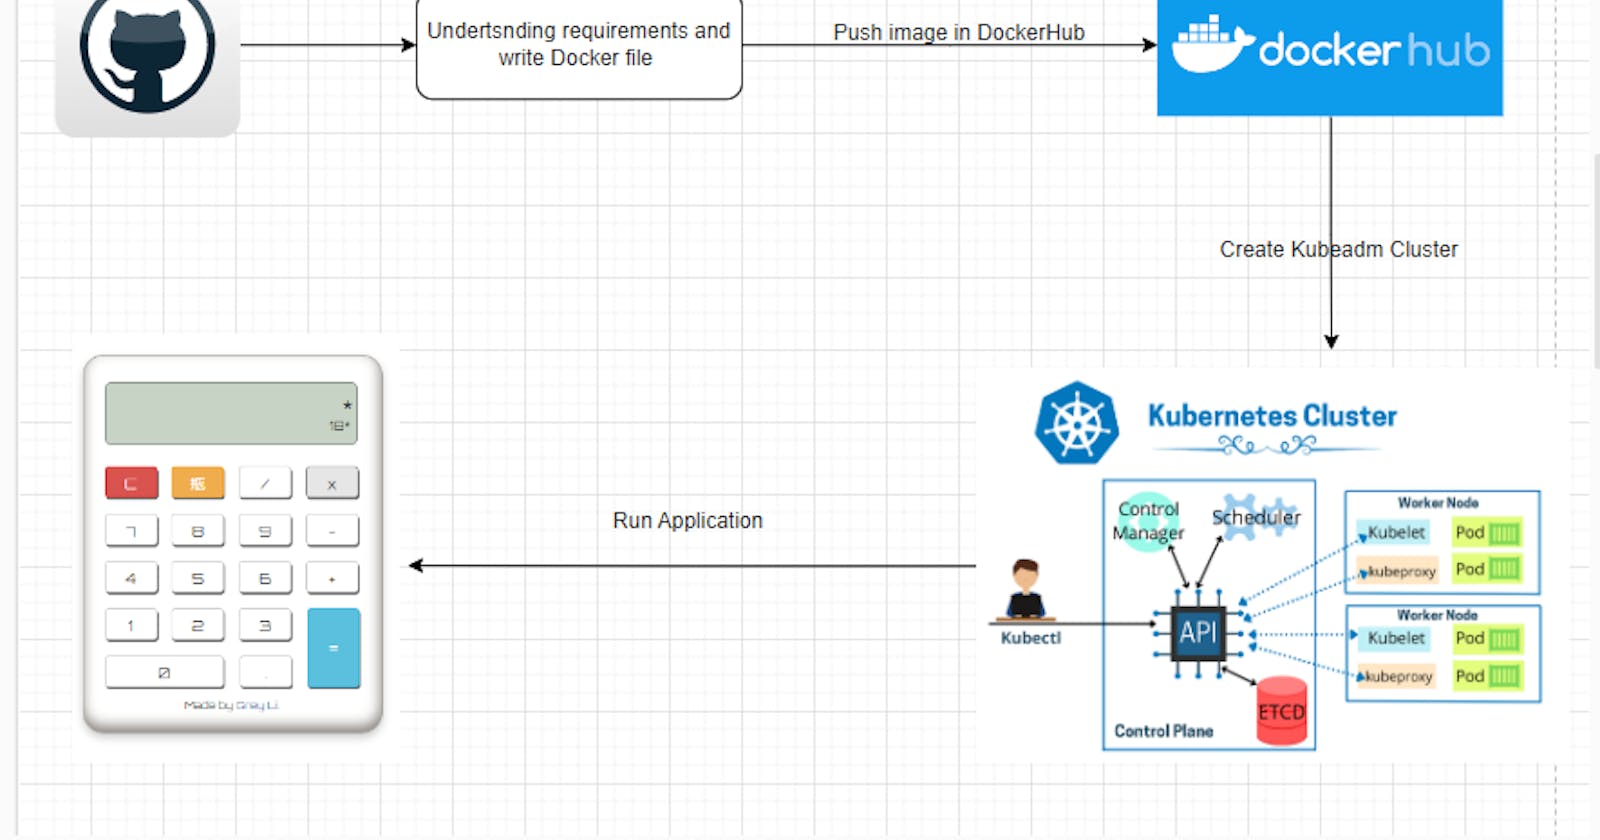 Deploy an application on Kubernetes